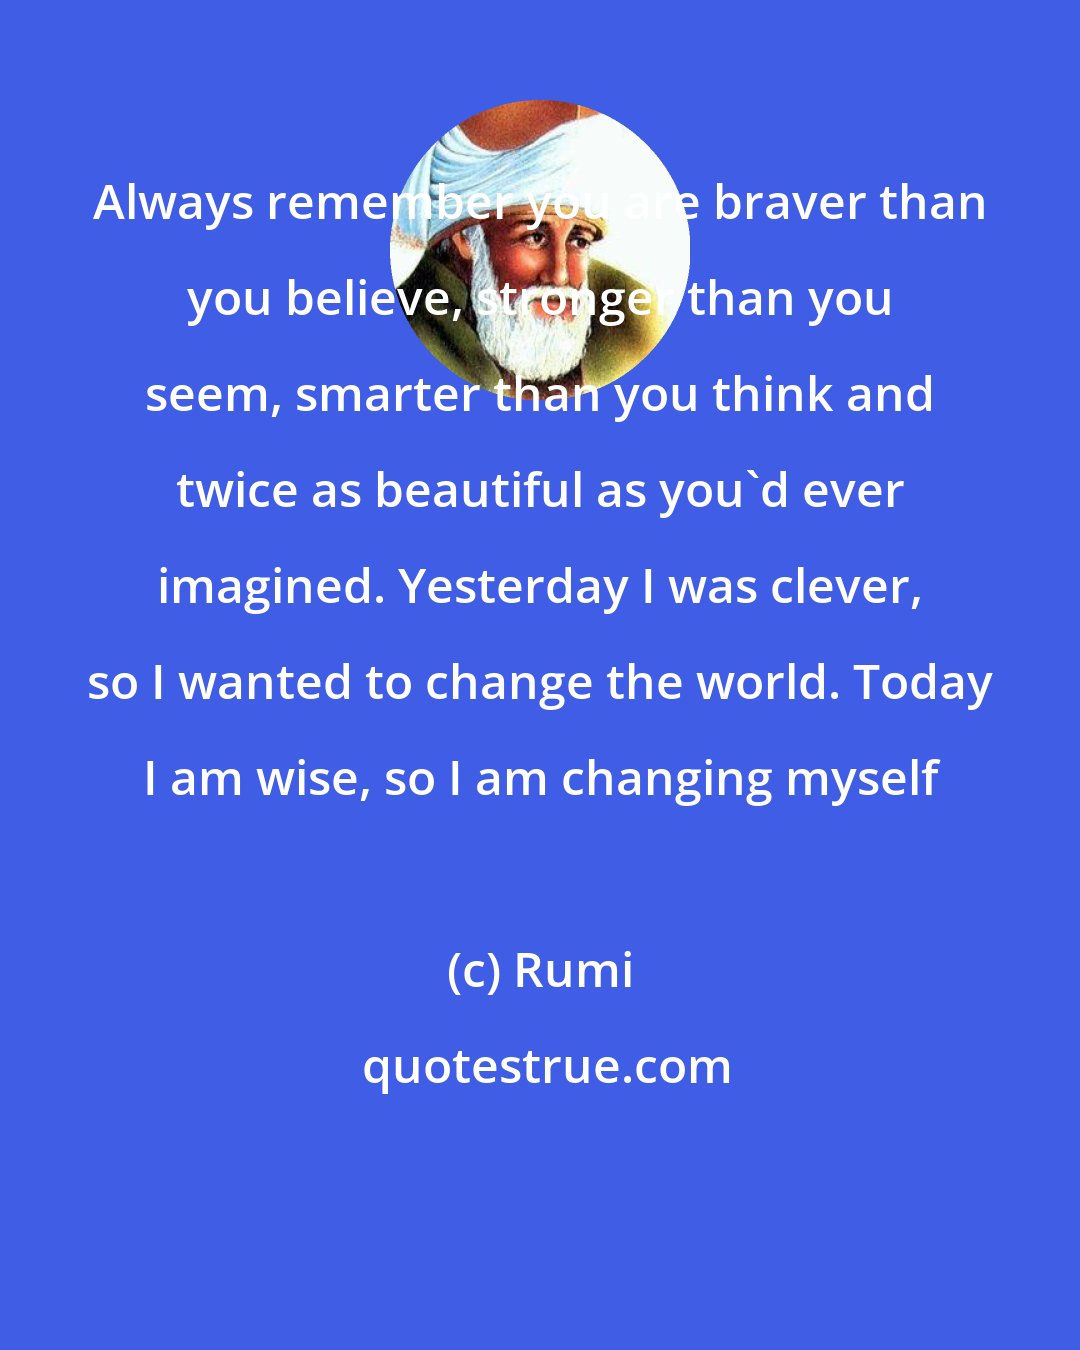 Rumi: Always remember you are braver than you believe, stronger than you seem, smarter than you think and twice as beautiful as you'd ever imagined. Yesterday I was clever, so I wanted to change the world. Today I am wise, so I am changing myself